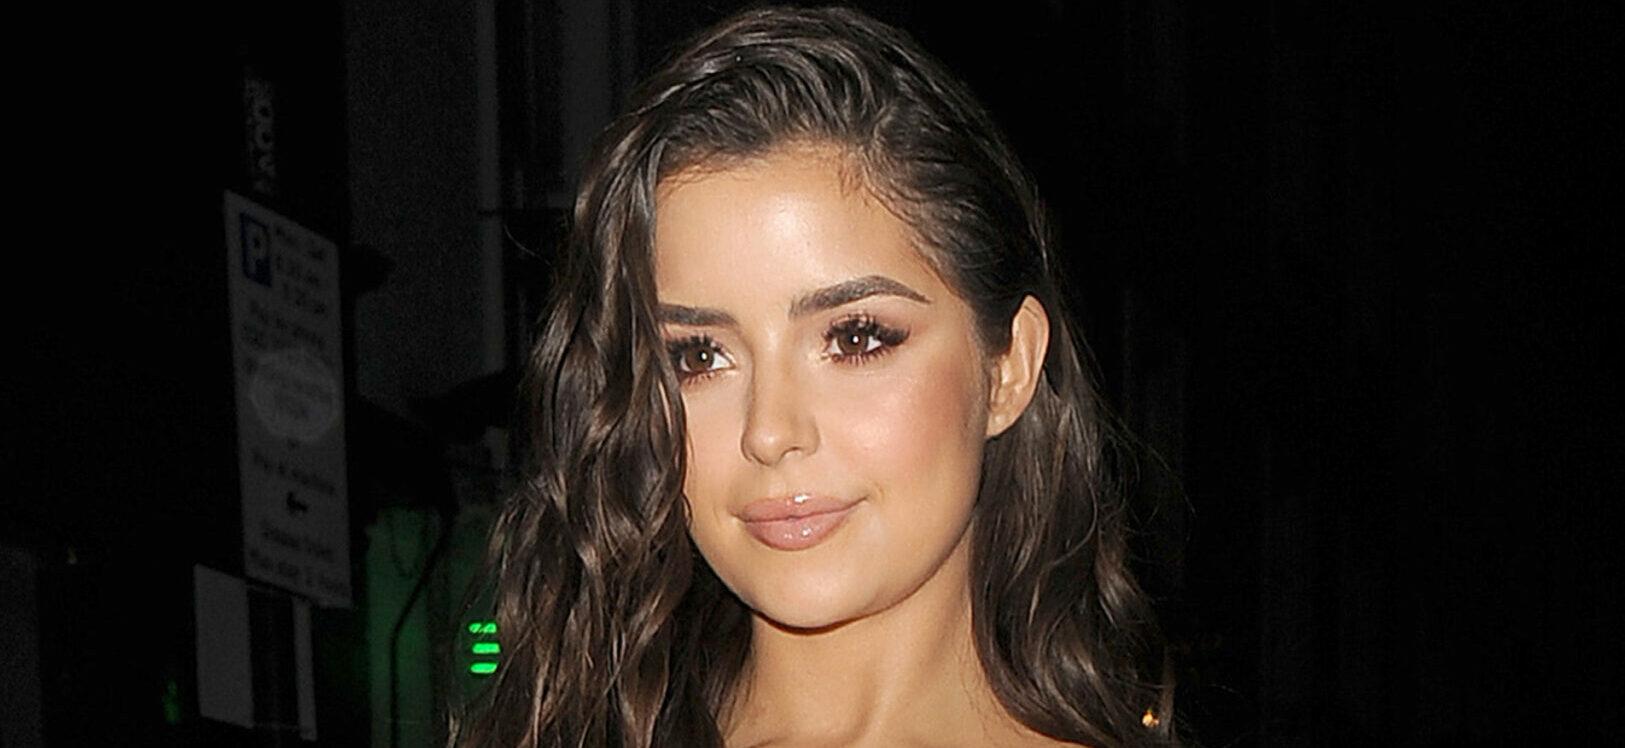 Demi Rose celebrates her birthday with friends at Ciro Pizza Pomodoro in Knightsbridge The group then headed to The Box Club in Soho